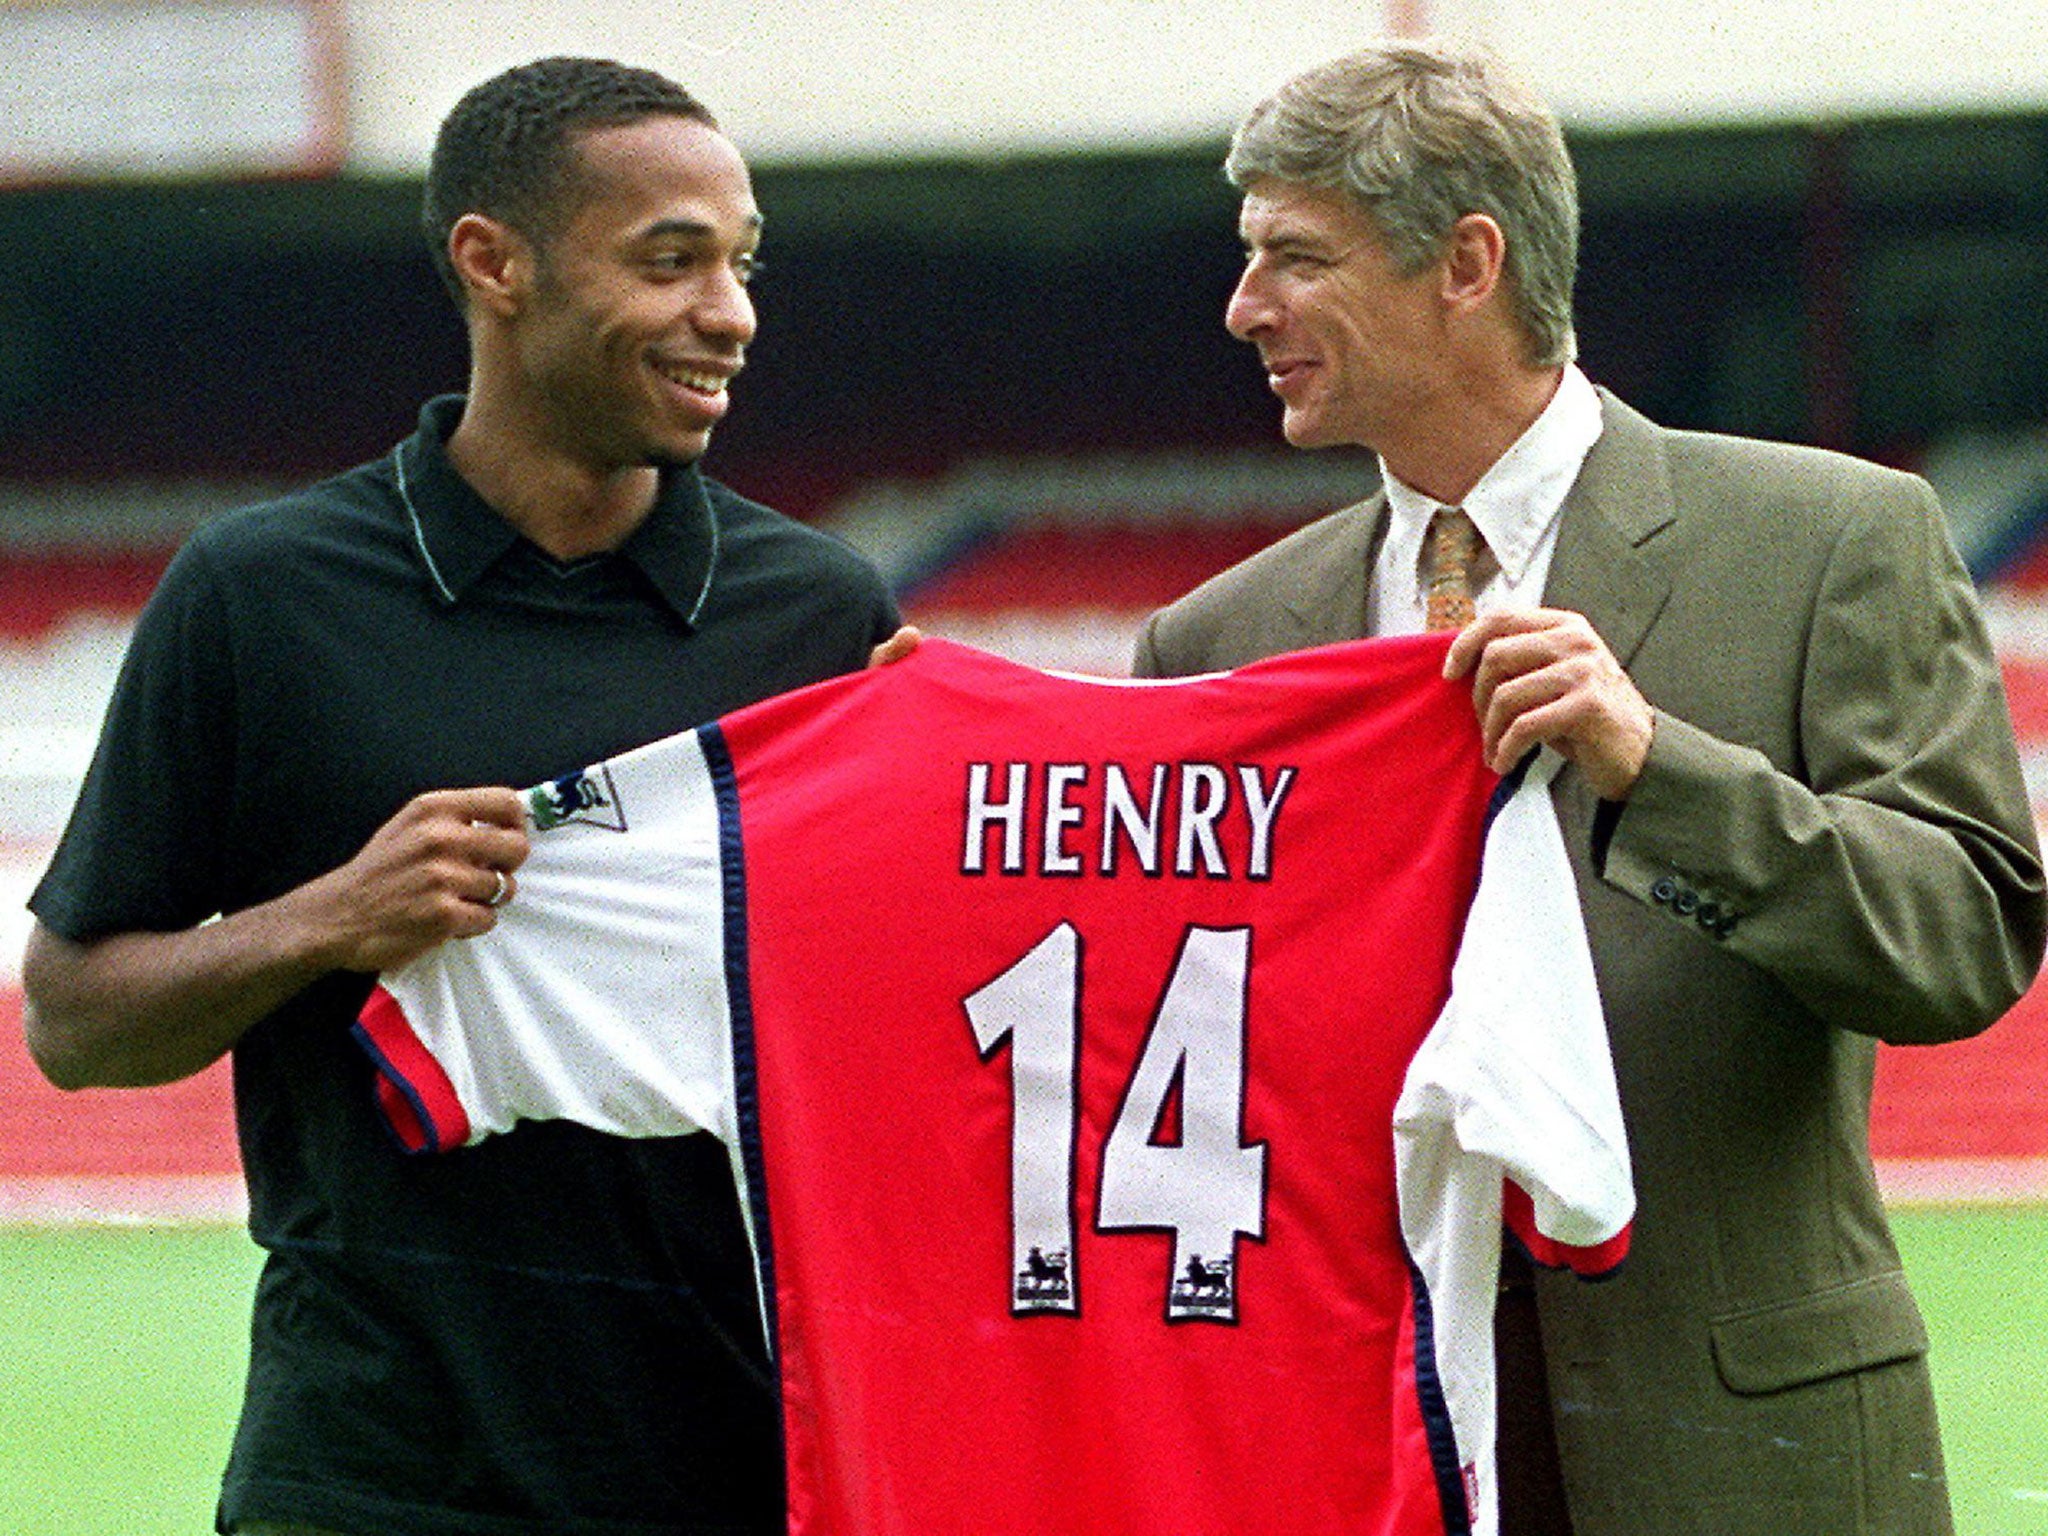 Thierry Henry is presented as an Arsenal player alongside Arsene Wenger in 1999